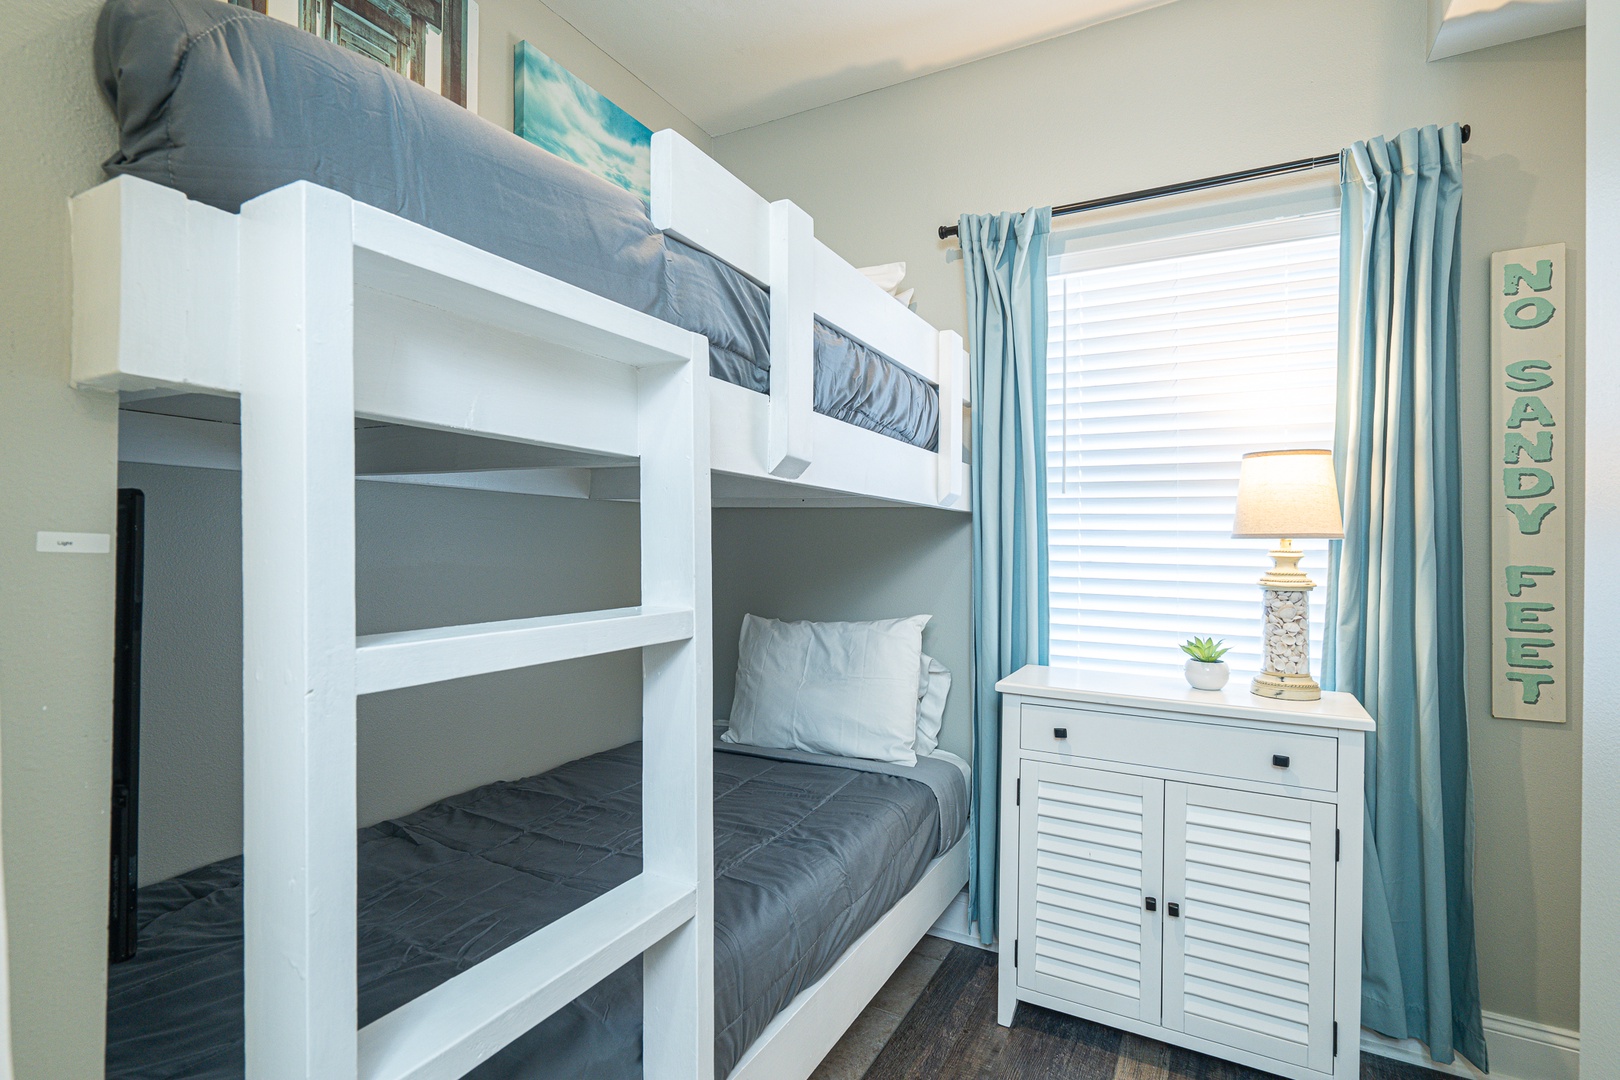 Escape to the twin-over-twin bunks in the sleeping nook for an afternoon nap